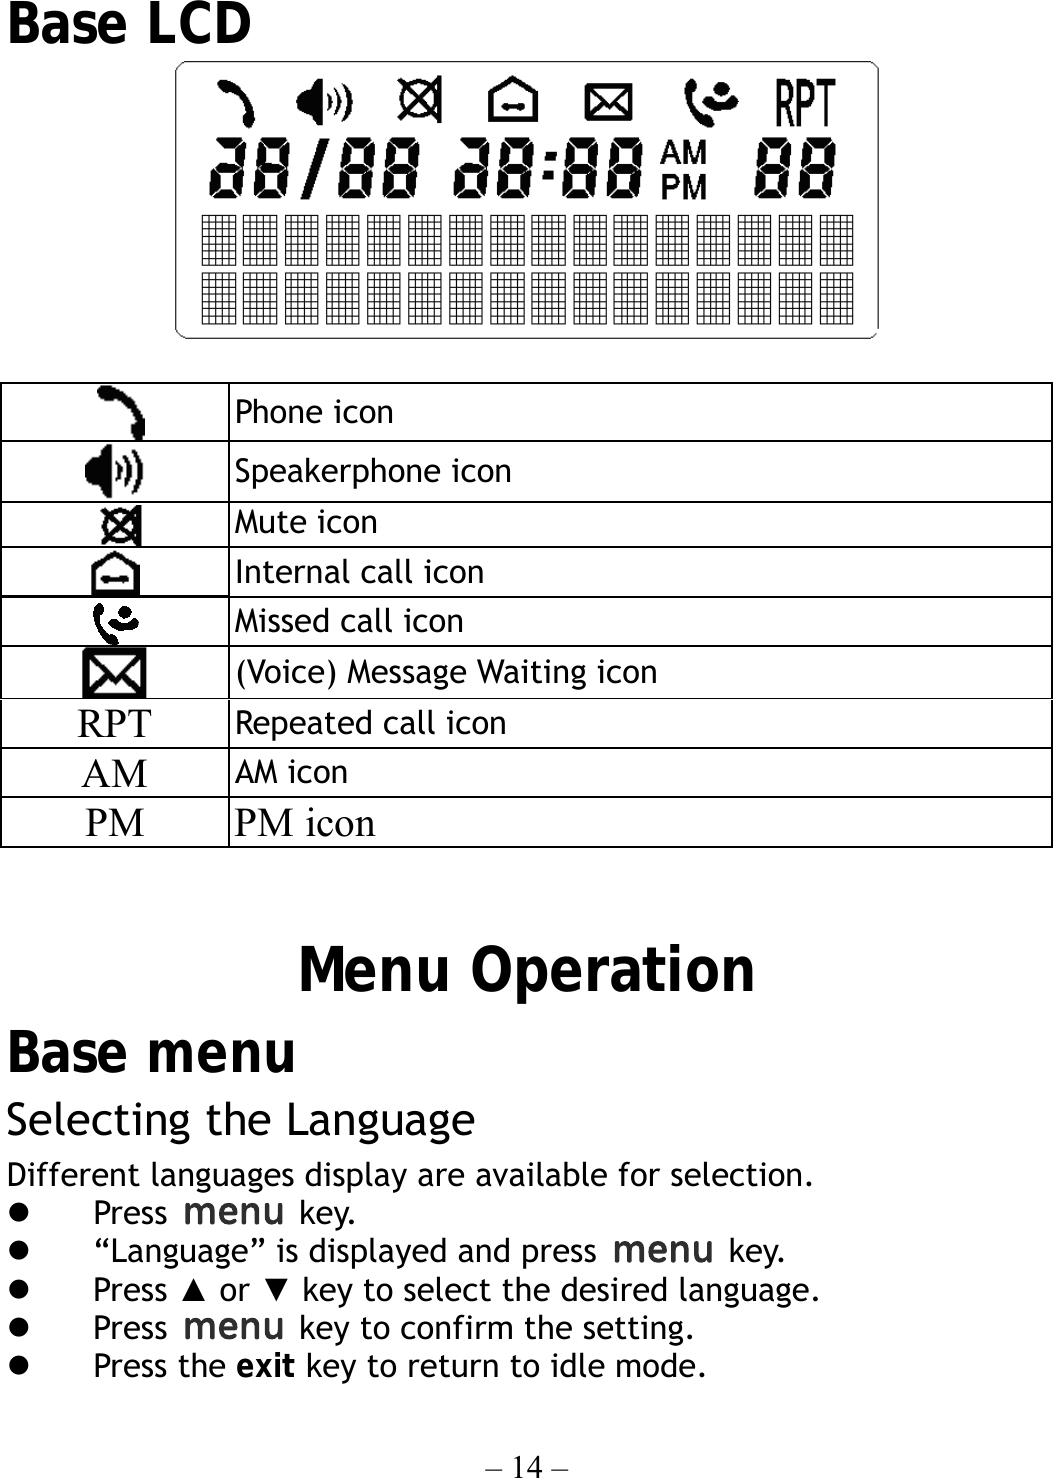 – 14 –    Base LCD    Phone icon  Speakerphone icon  Mute icon  Internal call icon  Missed call icon  (Voice) Message Waiting icon RPT  Repeated call icon AM  AM icon PM PM icon   Menu Operation Base menu Selecting the Language Different languages display are available for selection.     Press   key.   “Language” is displayed and press   key.   Press ▲ or ▼ key to select the desired language.   Press    key to confirm the setting.   Press the exit key to return to idle mode. 